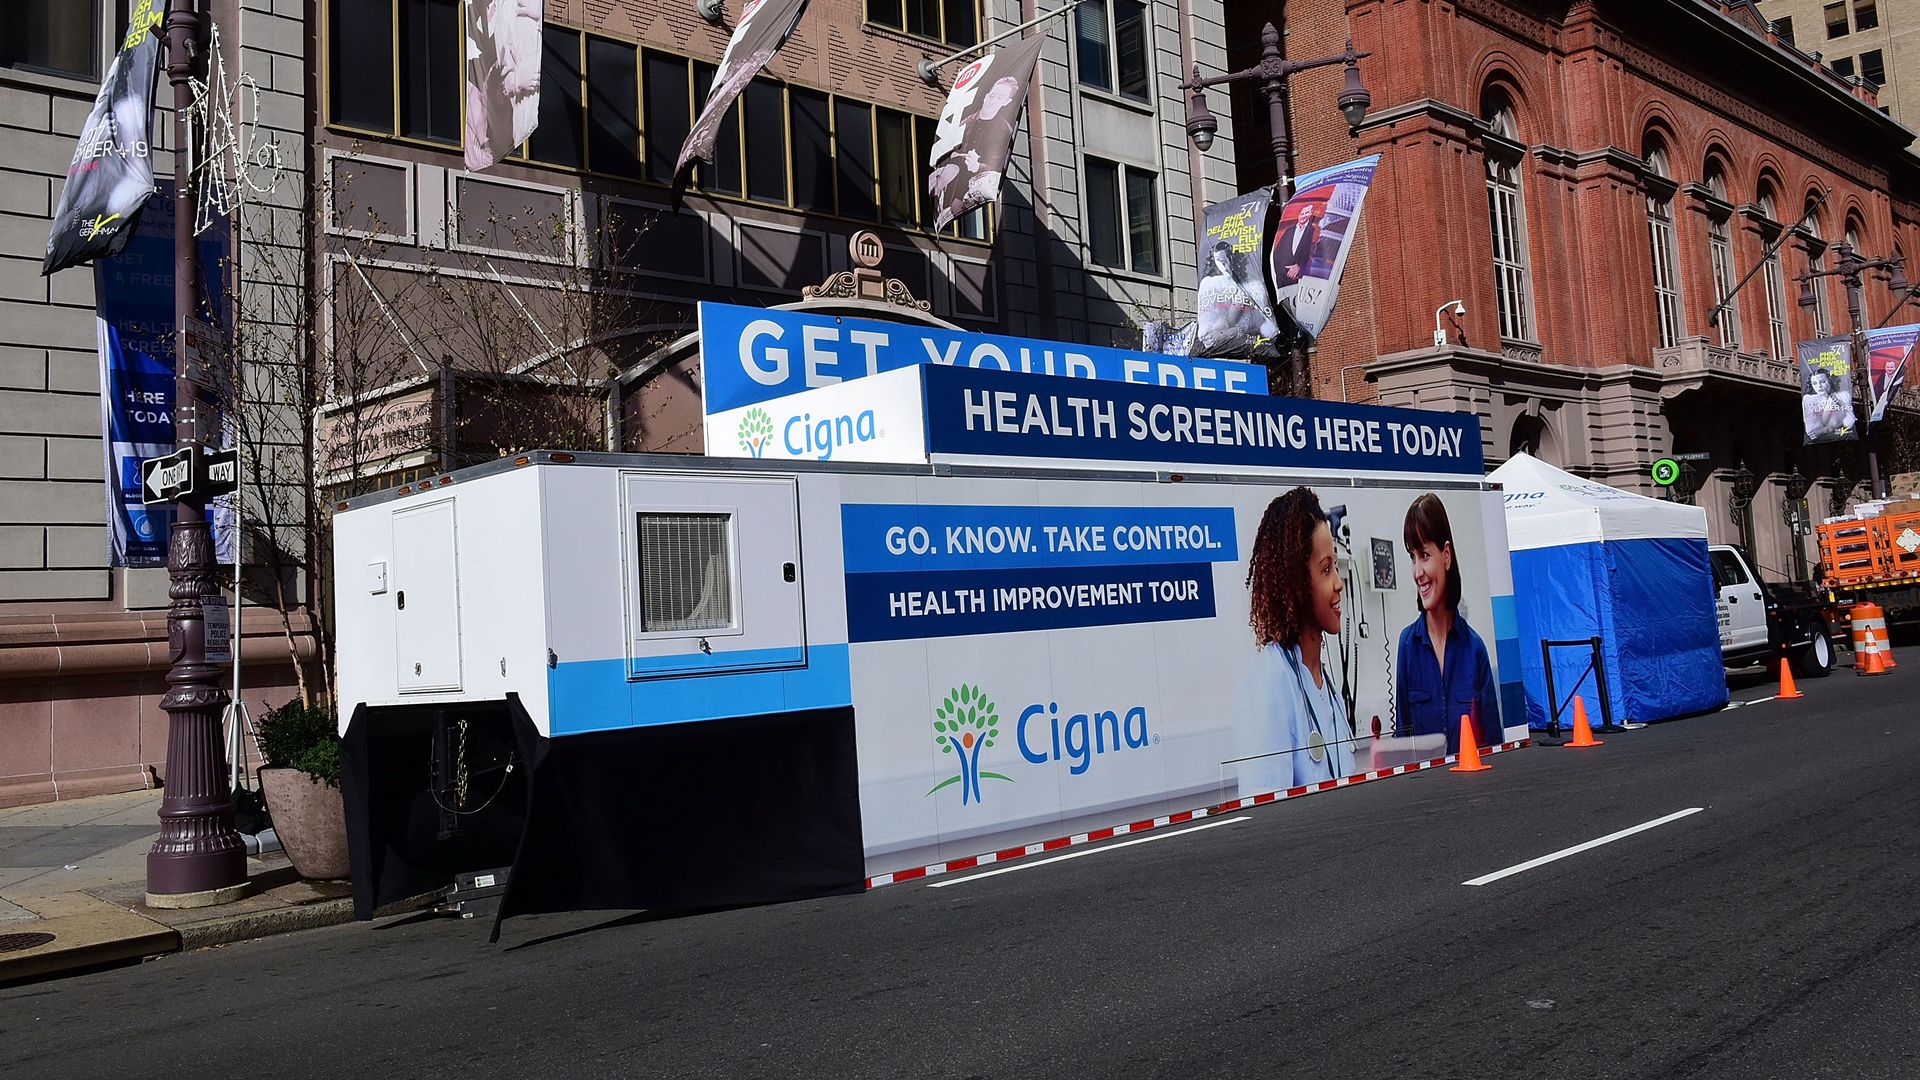 A Cigna mobile unit sets up for health screenings.